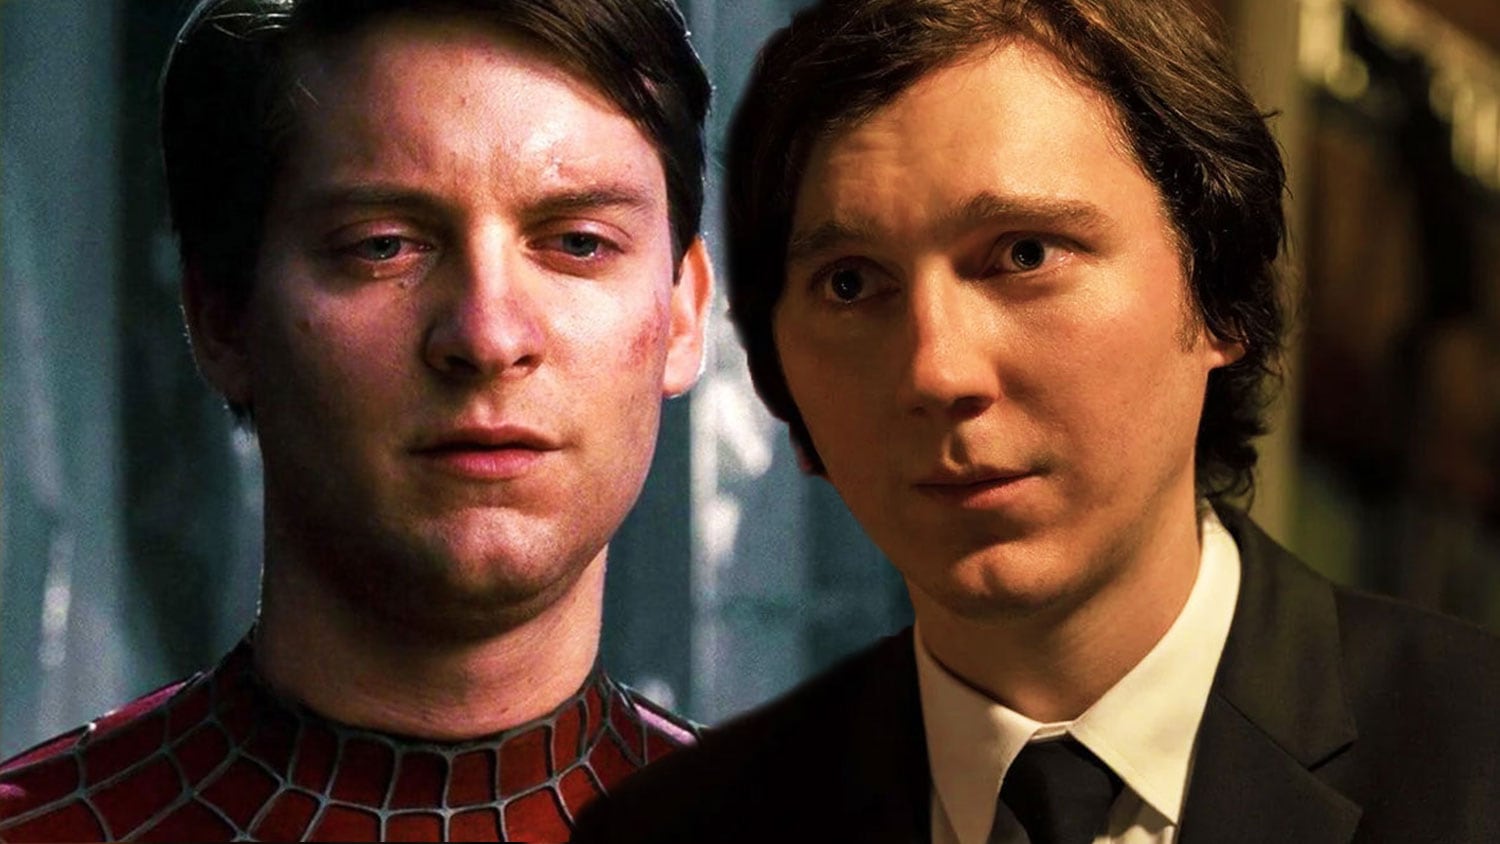 Tobey Maguire - Rotten Tomatoes